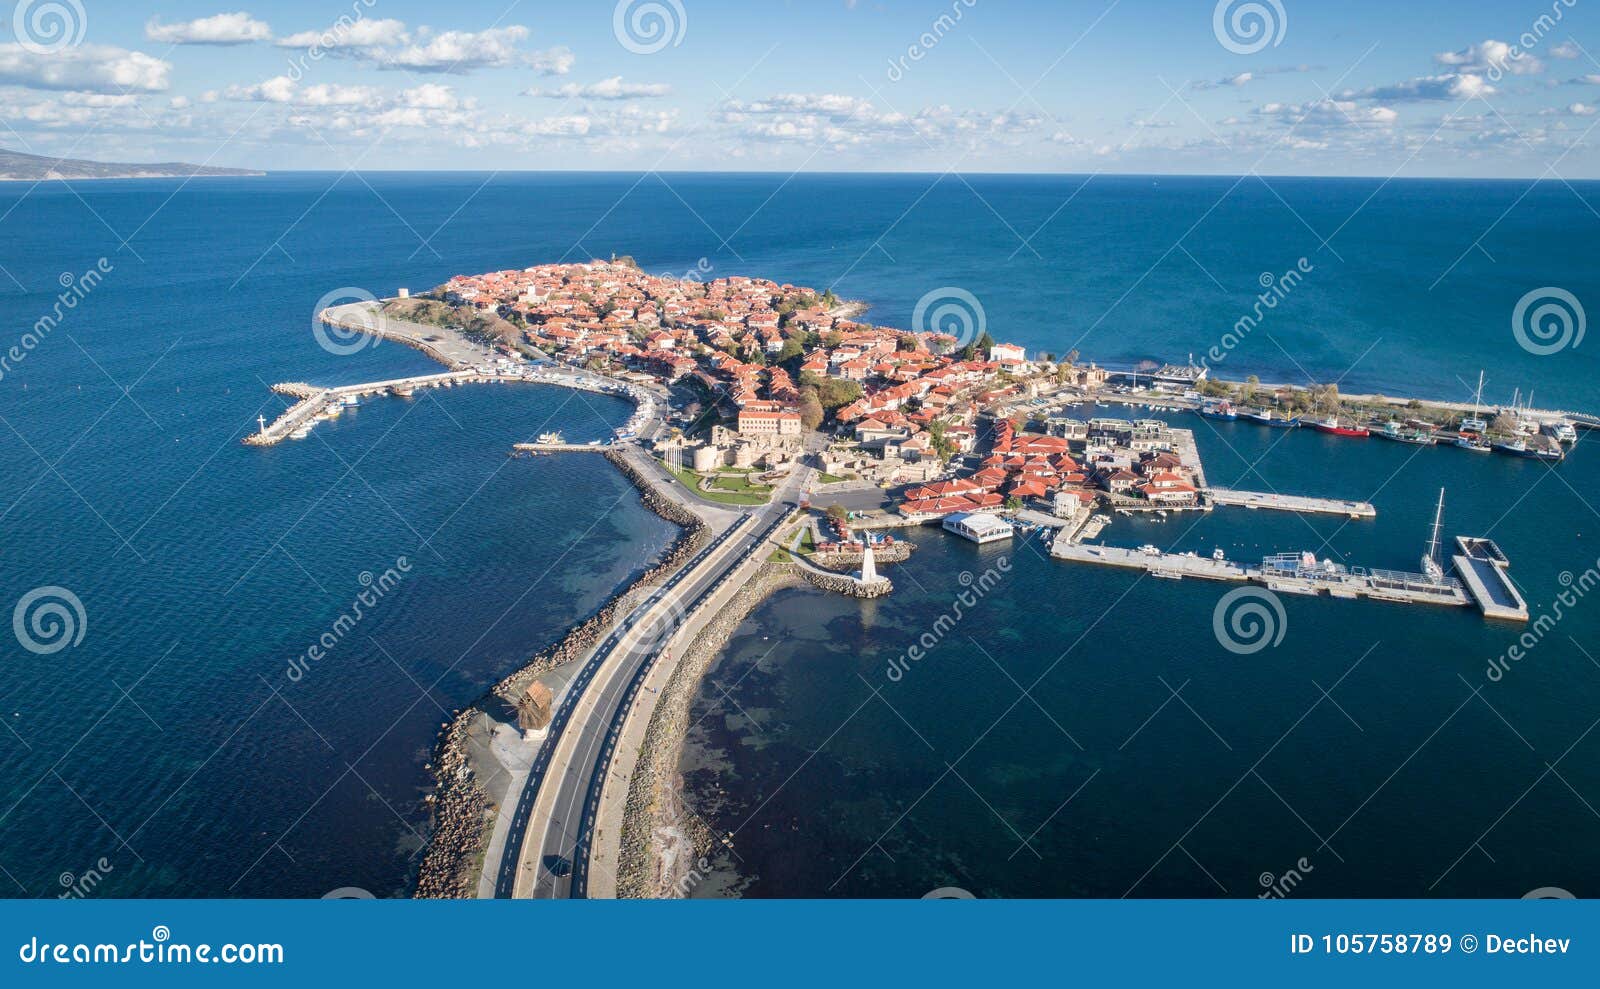 general view of nessebar, ancient city on the black sea coast of bulgaria. panoramic aerial view.